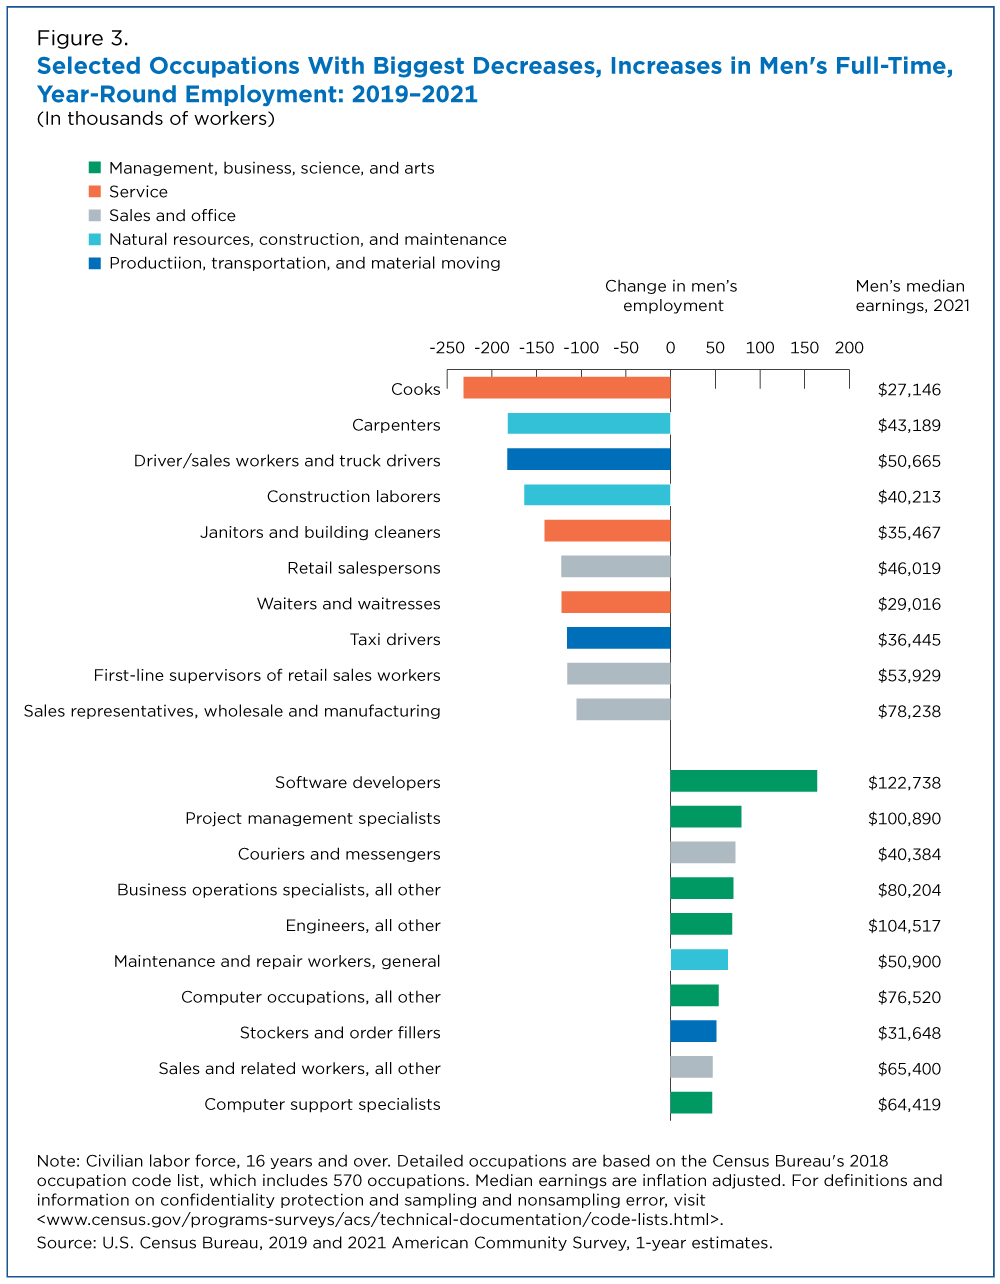 Figure 3. Selected Occupations With Biggest Decreases, Increases in Men's Full-Time, Year-Round Employment: 2019-2021